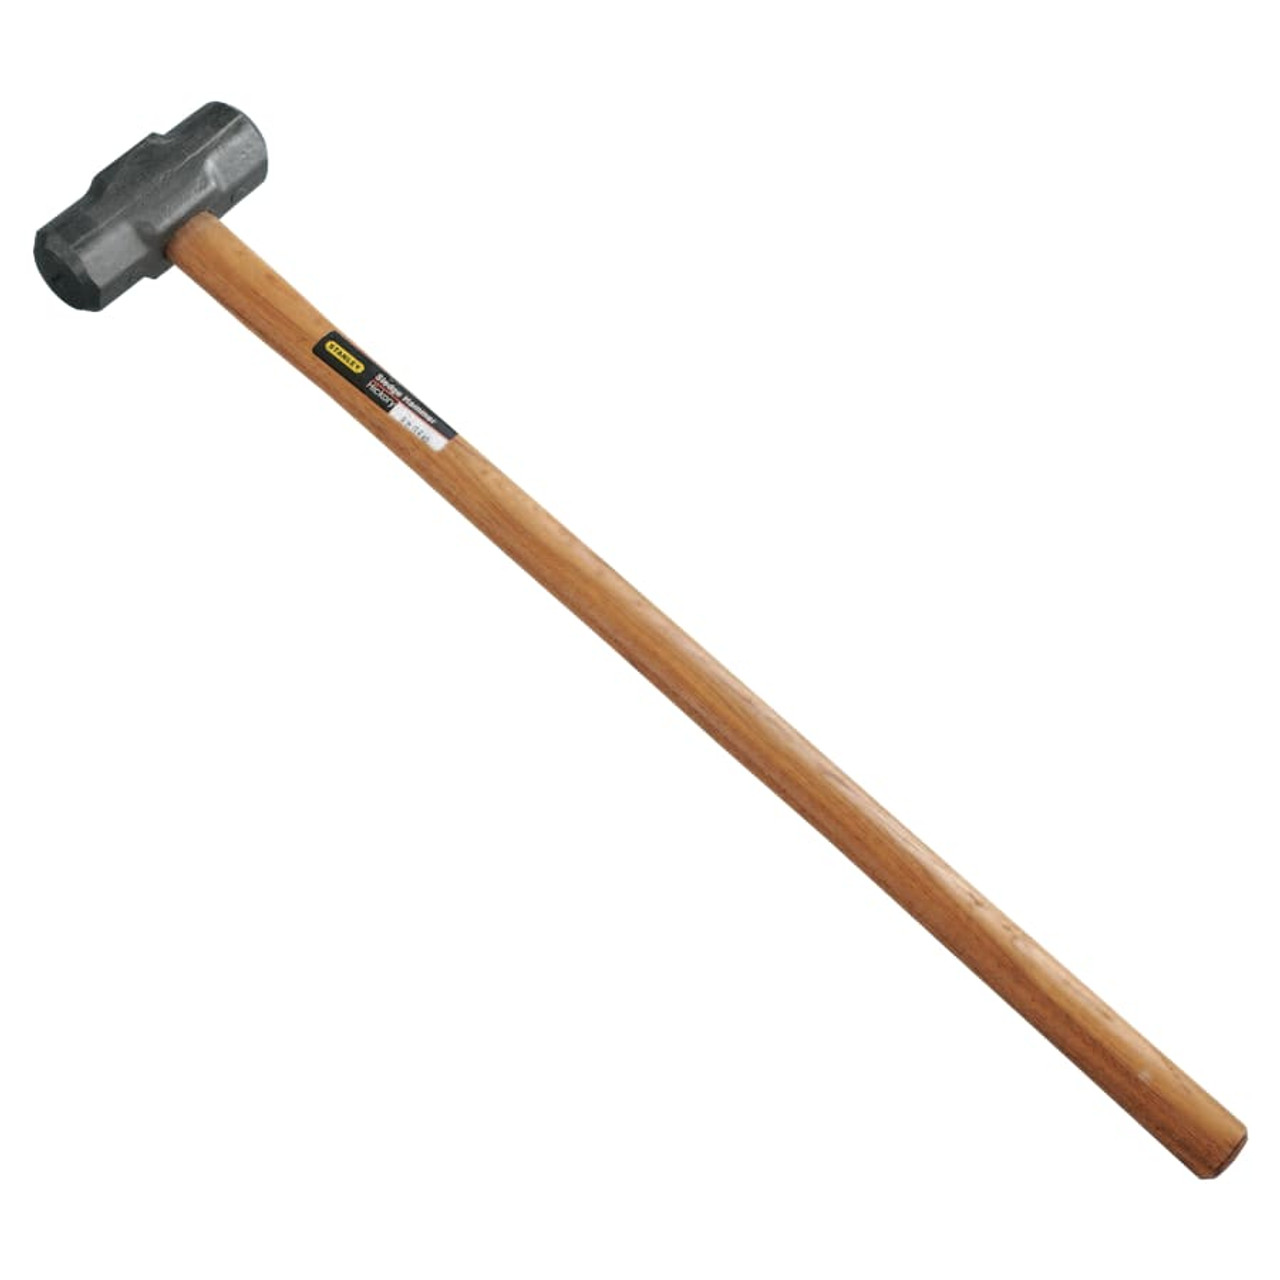 Hickory Handle Sledge Hammers, 8 lb, 28 in Handle (56-808)